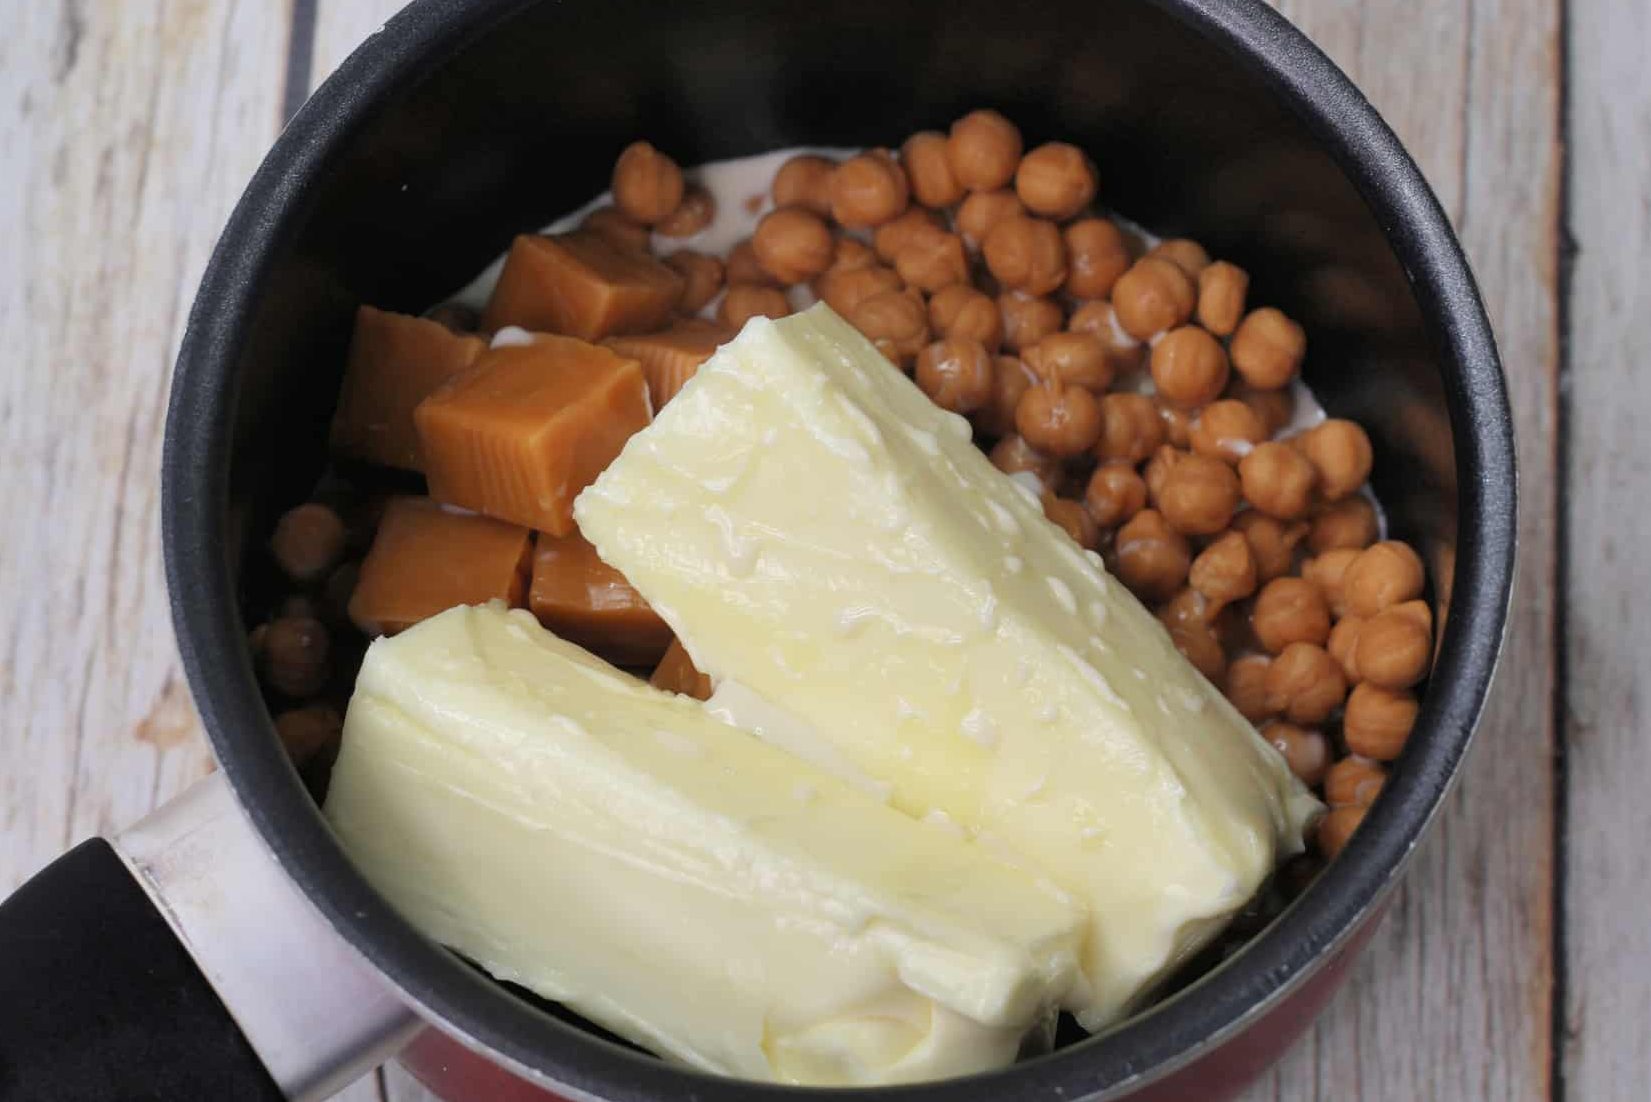 Using a saucepan, combine the caramel bits, butter, and evaporated milk and bring to medium heat.